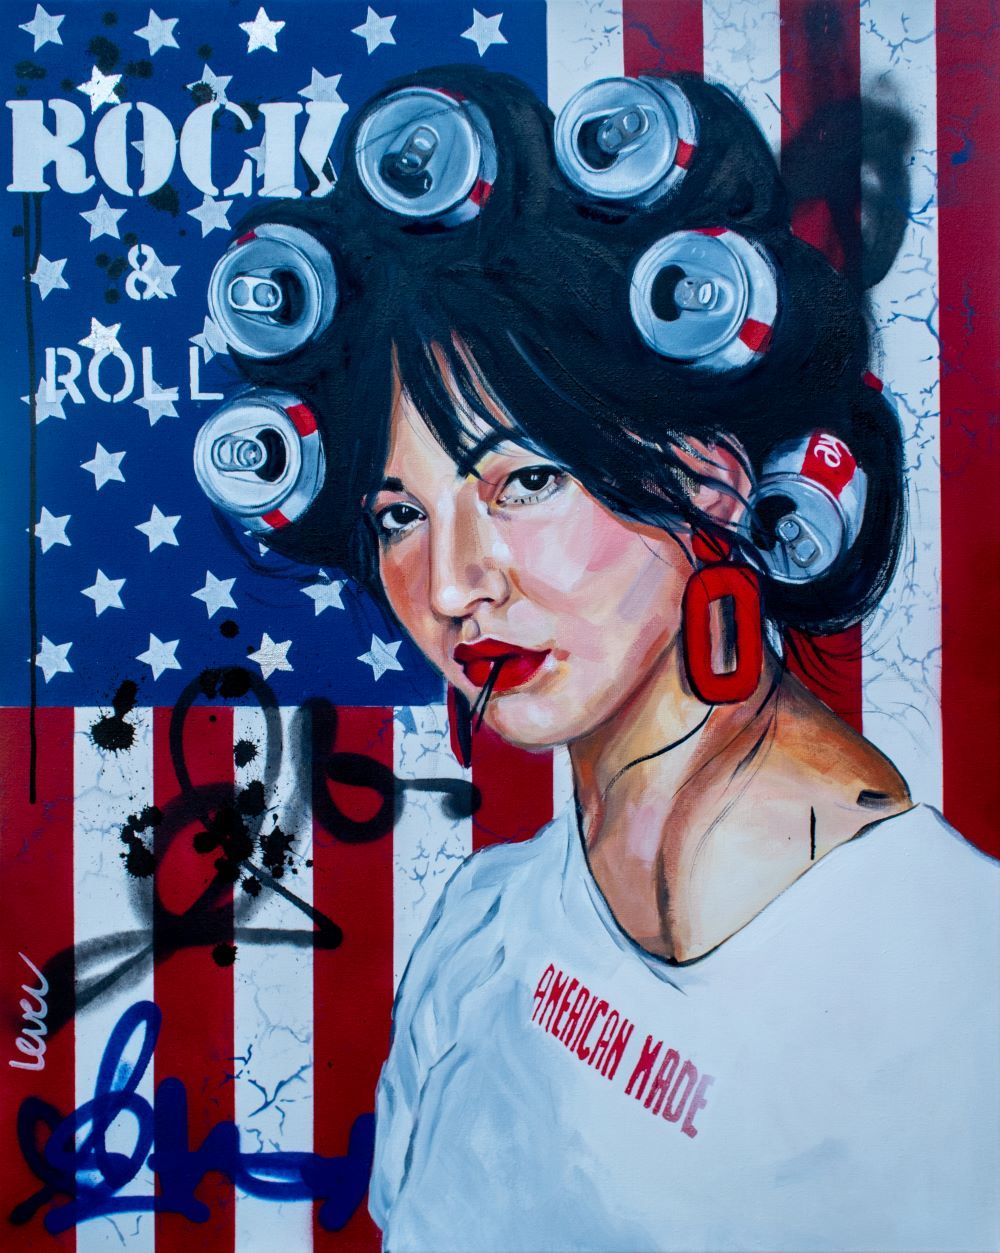 Rock__Roll_klein_formaat-553dd684 Contemporary mixed media artist, creating colorful, uplifting art.